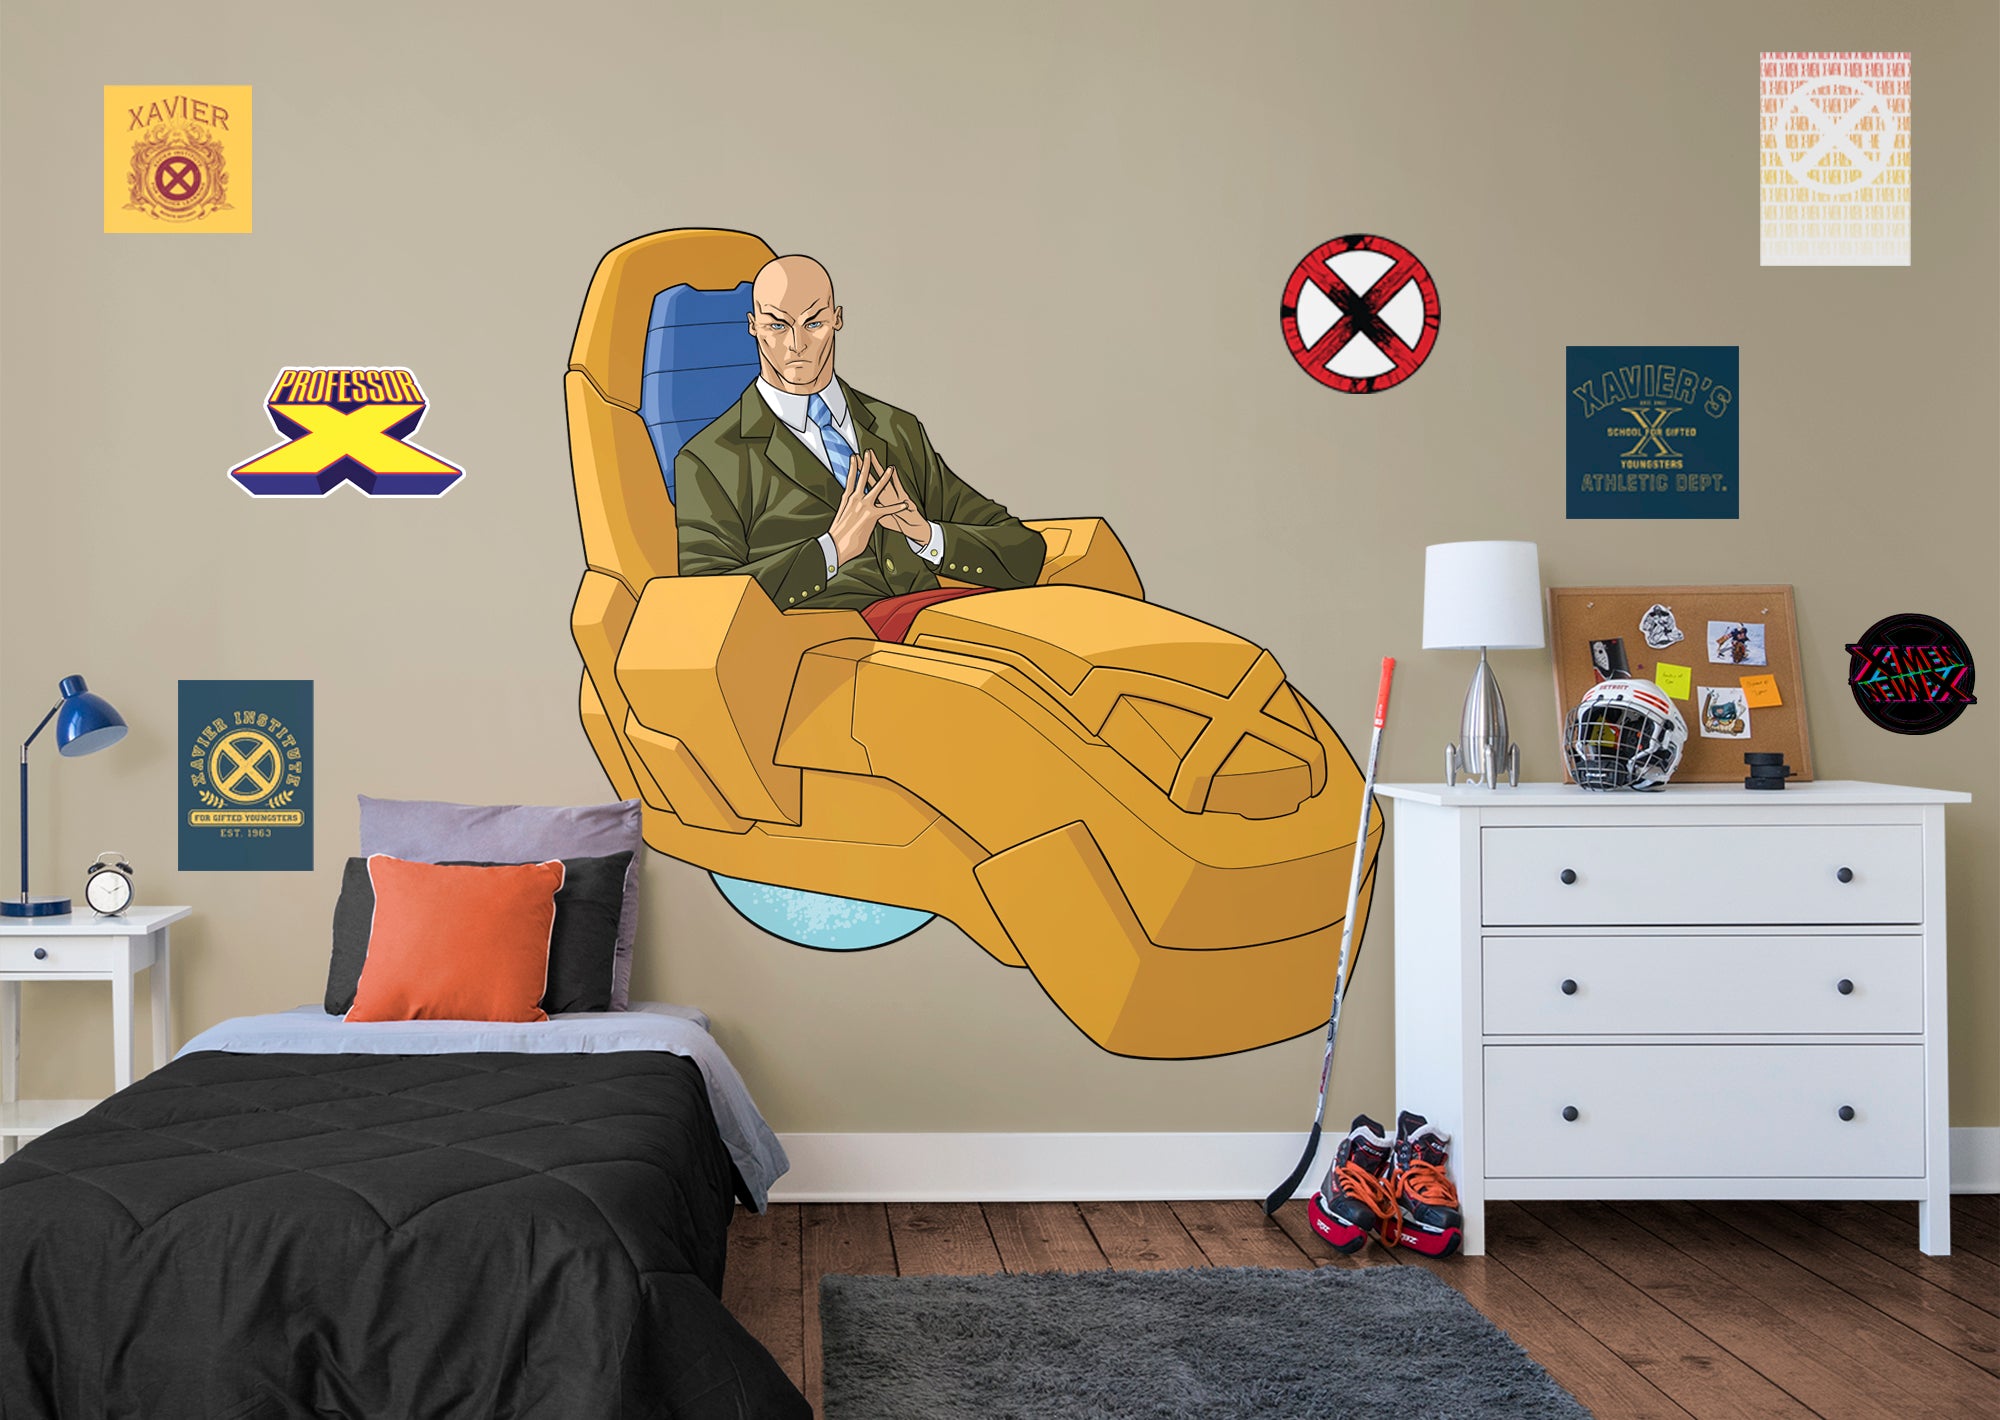 X-Men Professor-X RealBig - Officially Licensed Marvel Removable Wall Decal Life-Size Character + 7 Decals (77"W x 51"H) by Fath